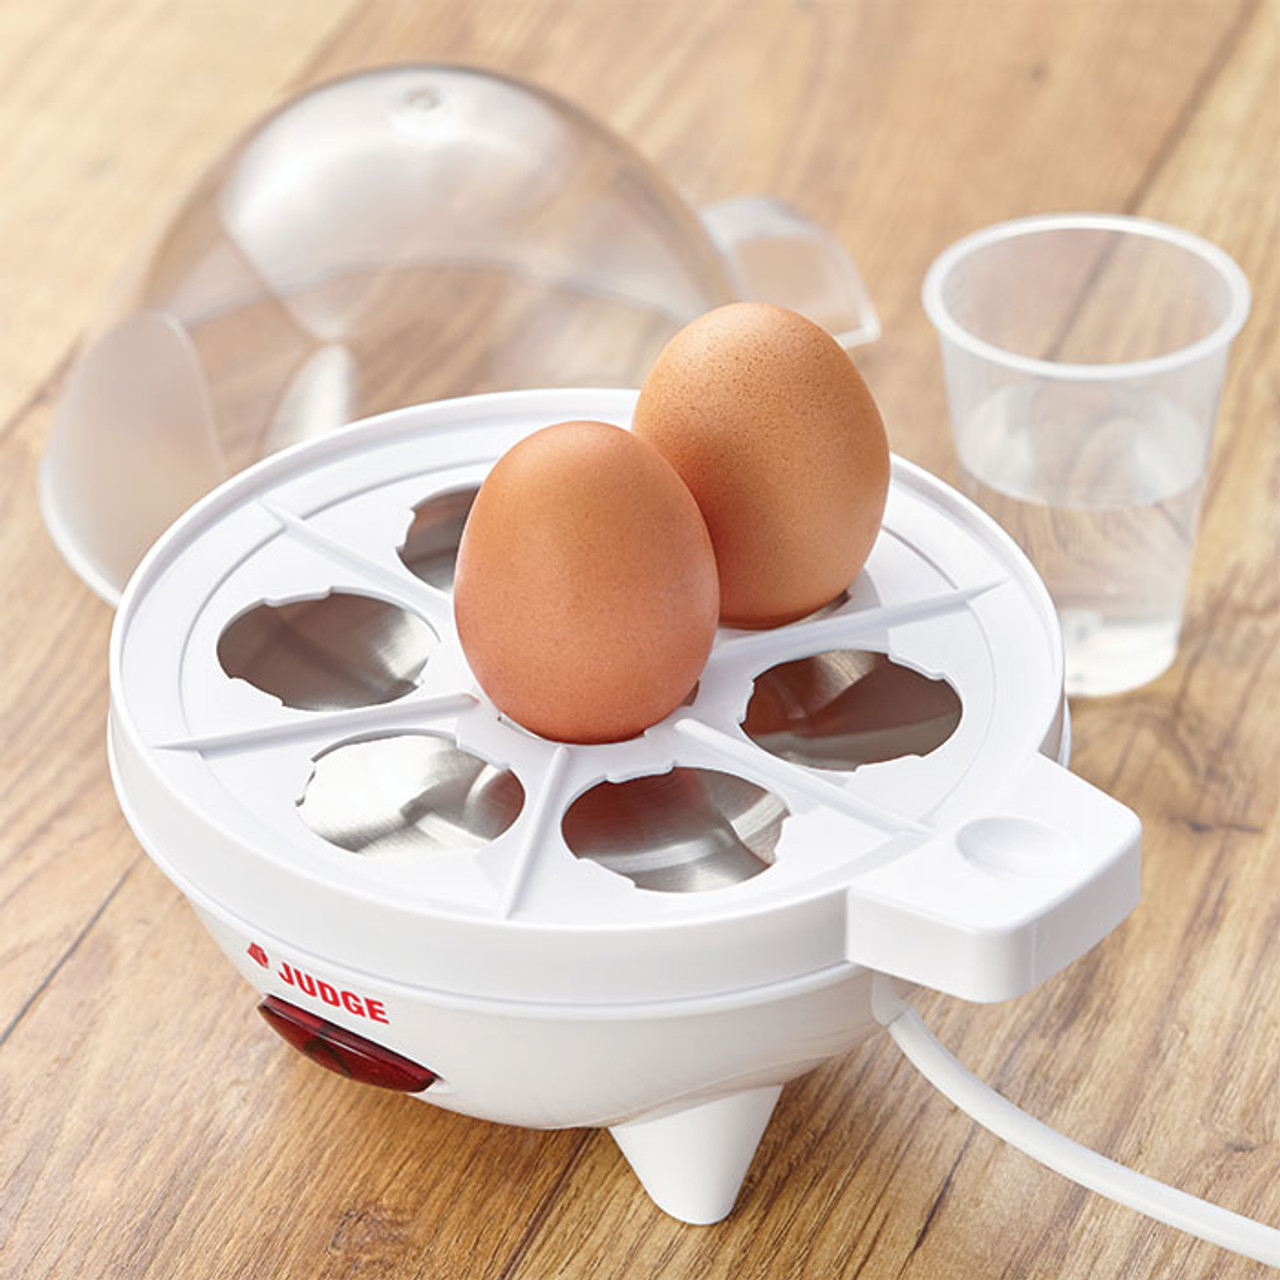 Judge Electrical 7 Hole Egg Cooker